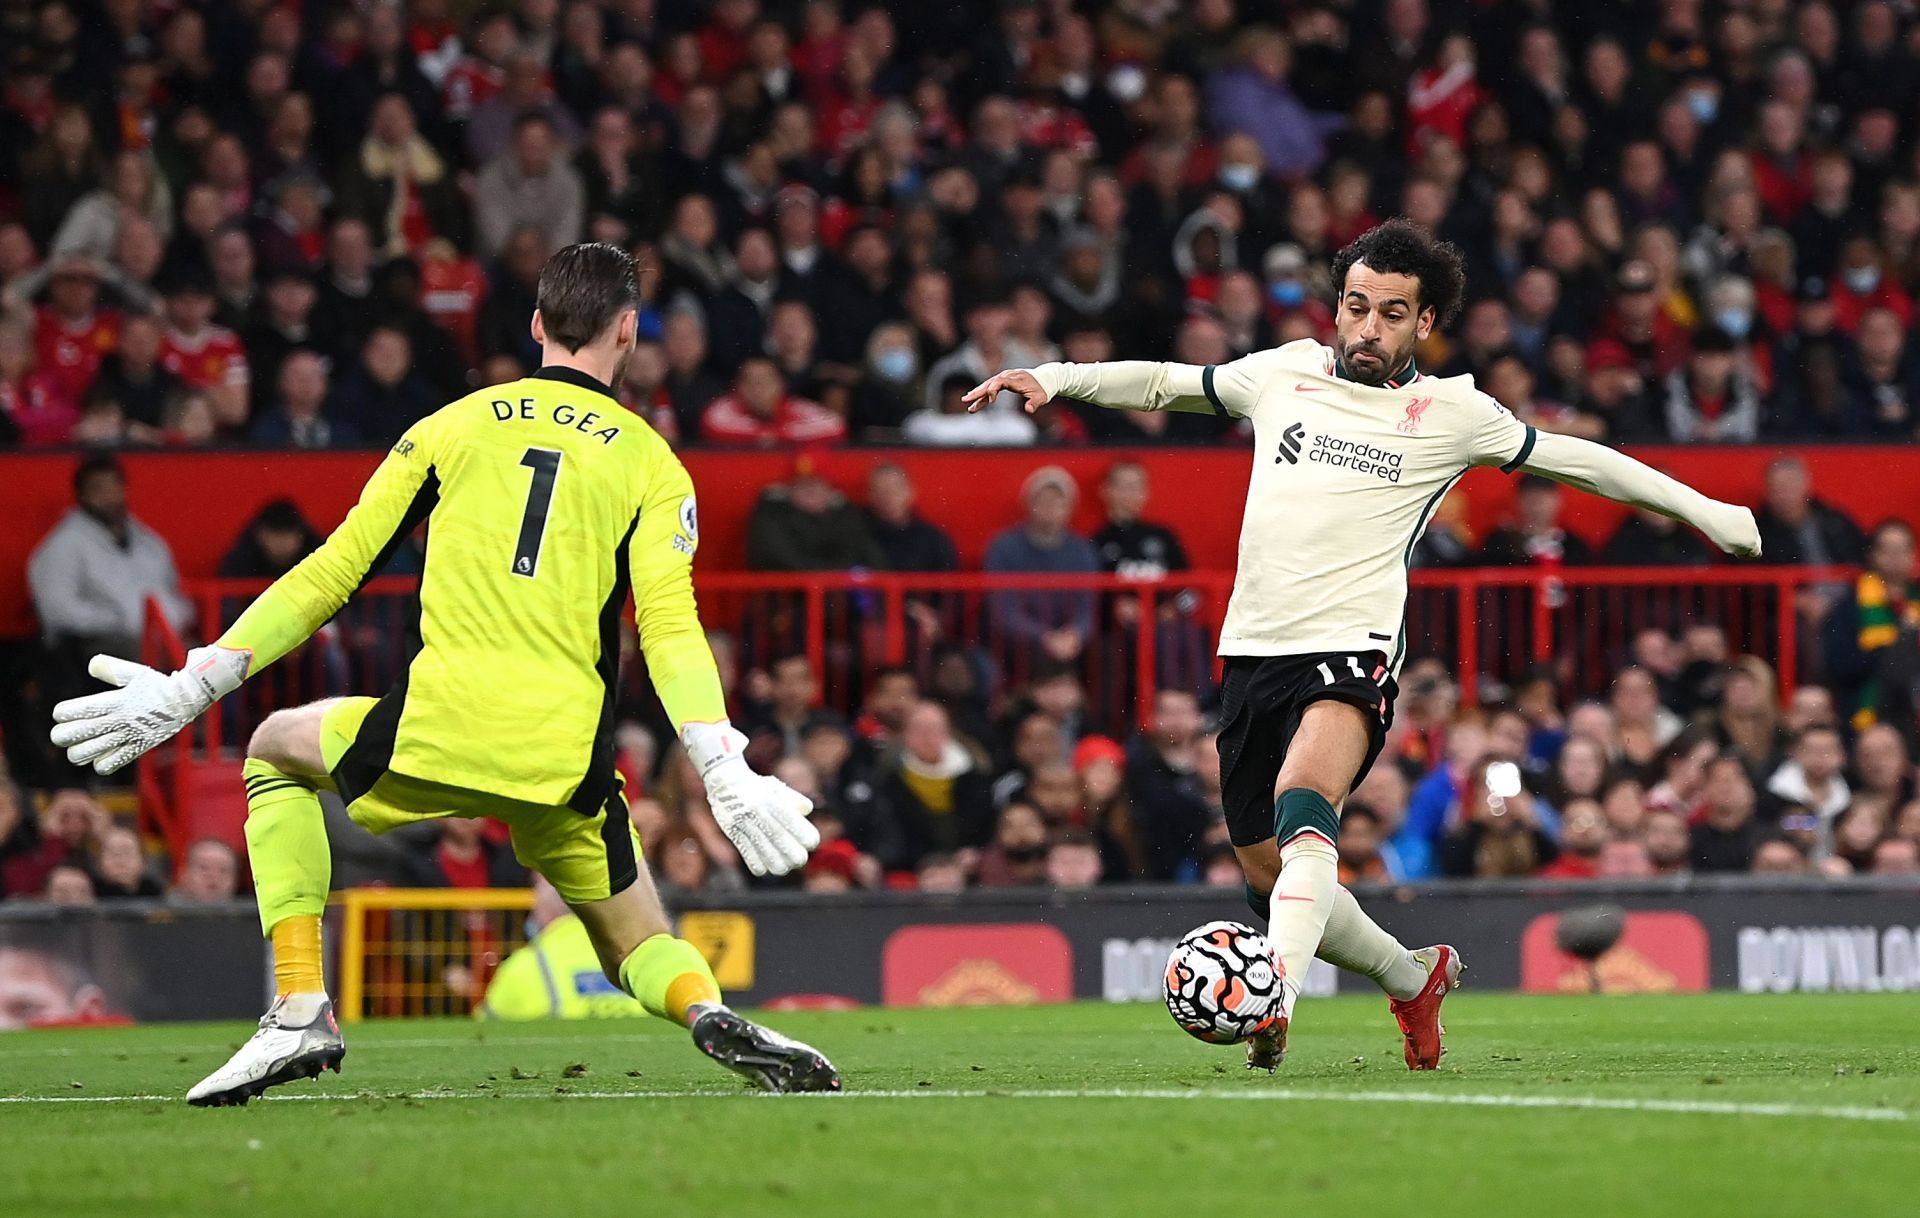 Mohammed Salah slots past David De Gea to complete his hat-trick at Old Trafford